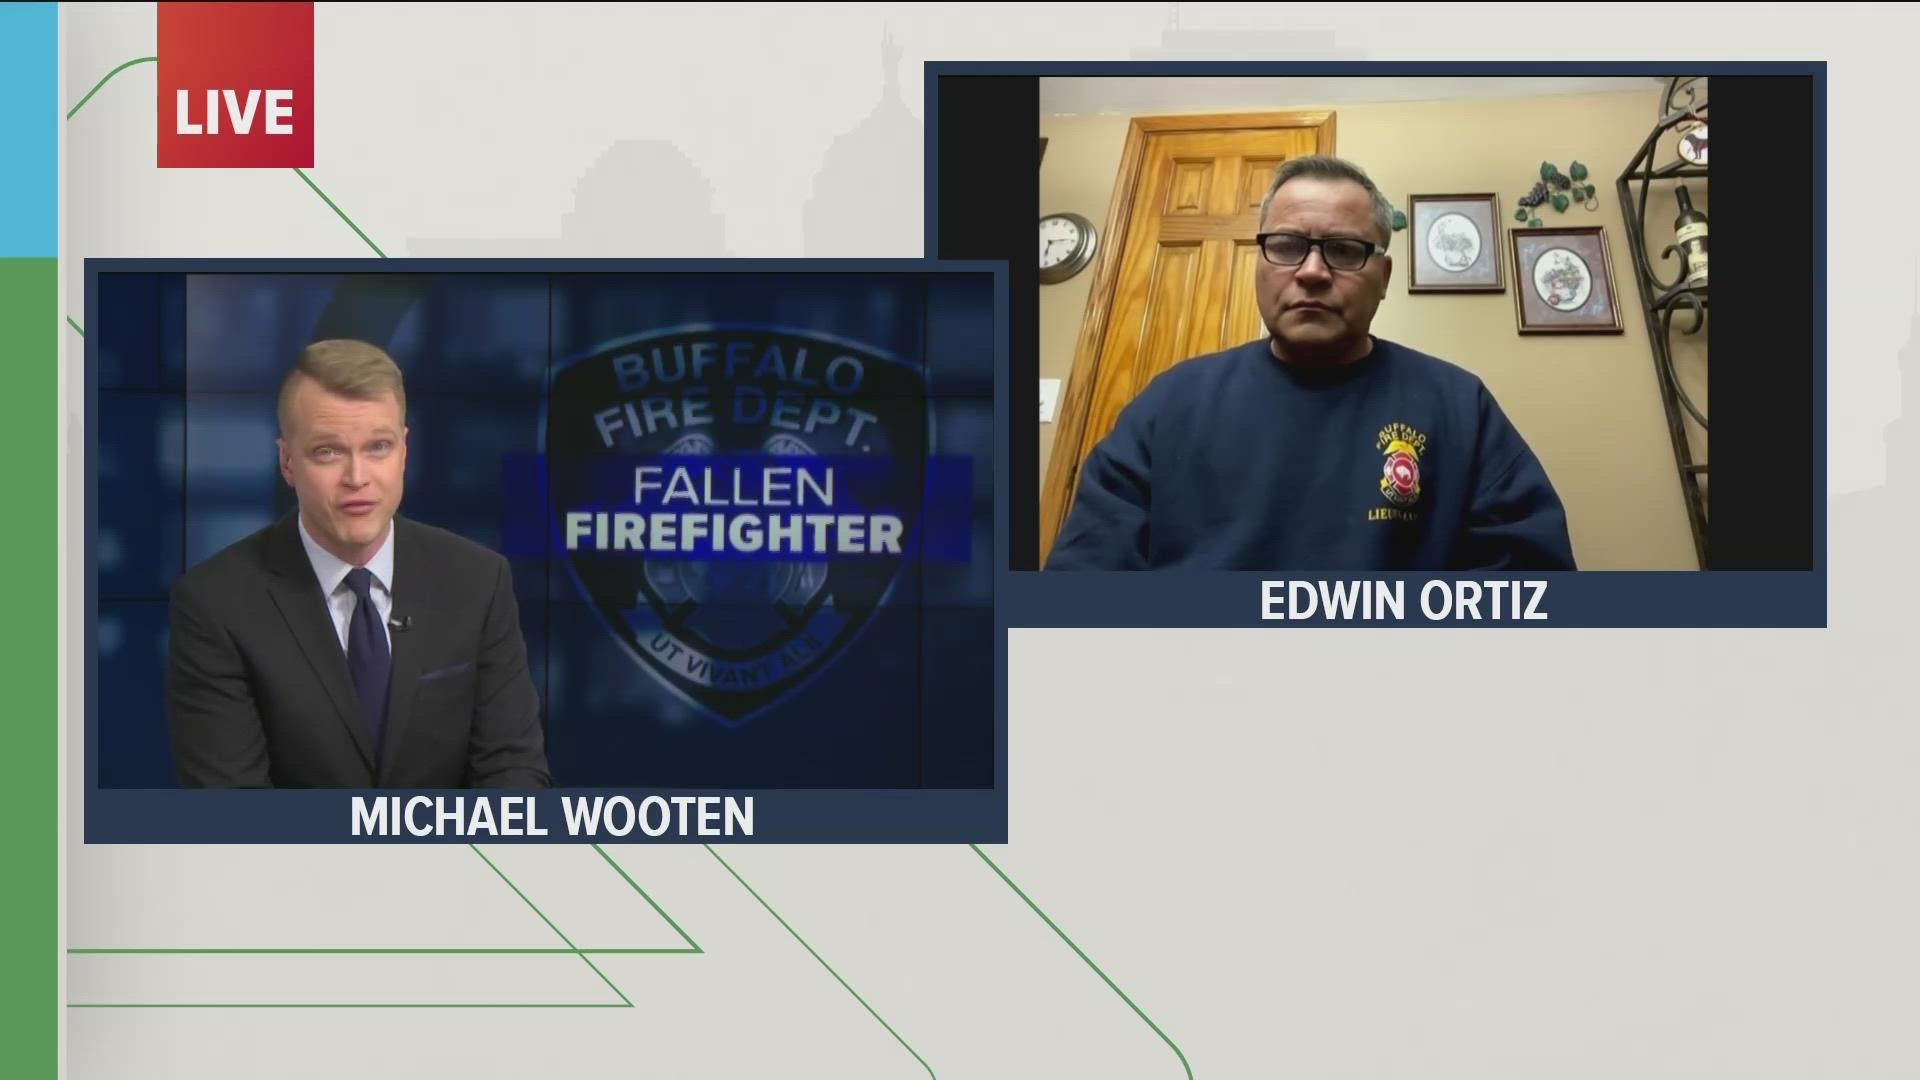 Edwin Ortiz, a retired Buffalo fire marshal, discussed the ATF's involvement into the fatal fire investigation.